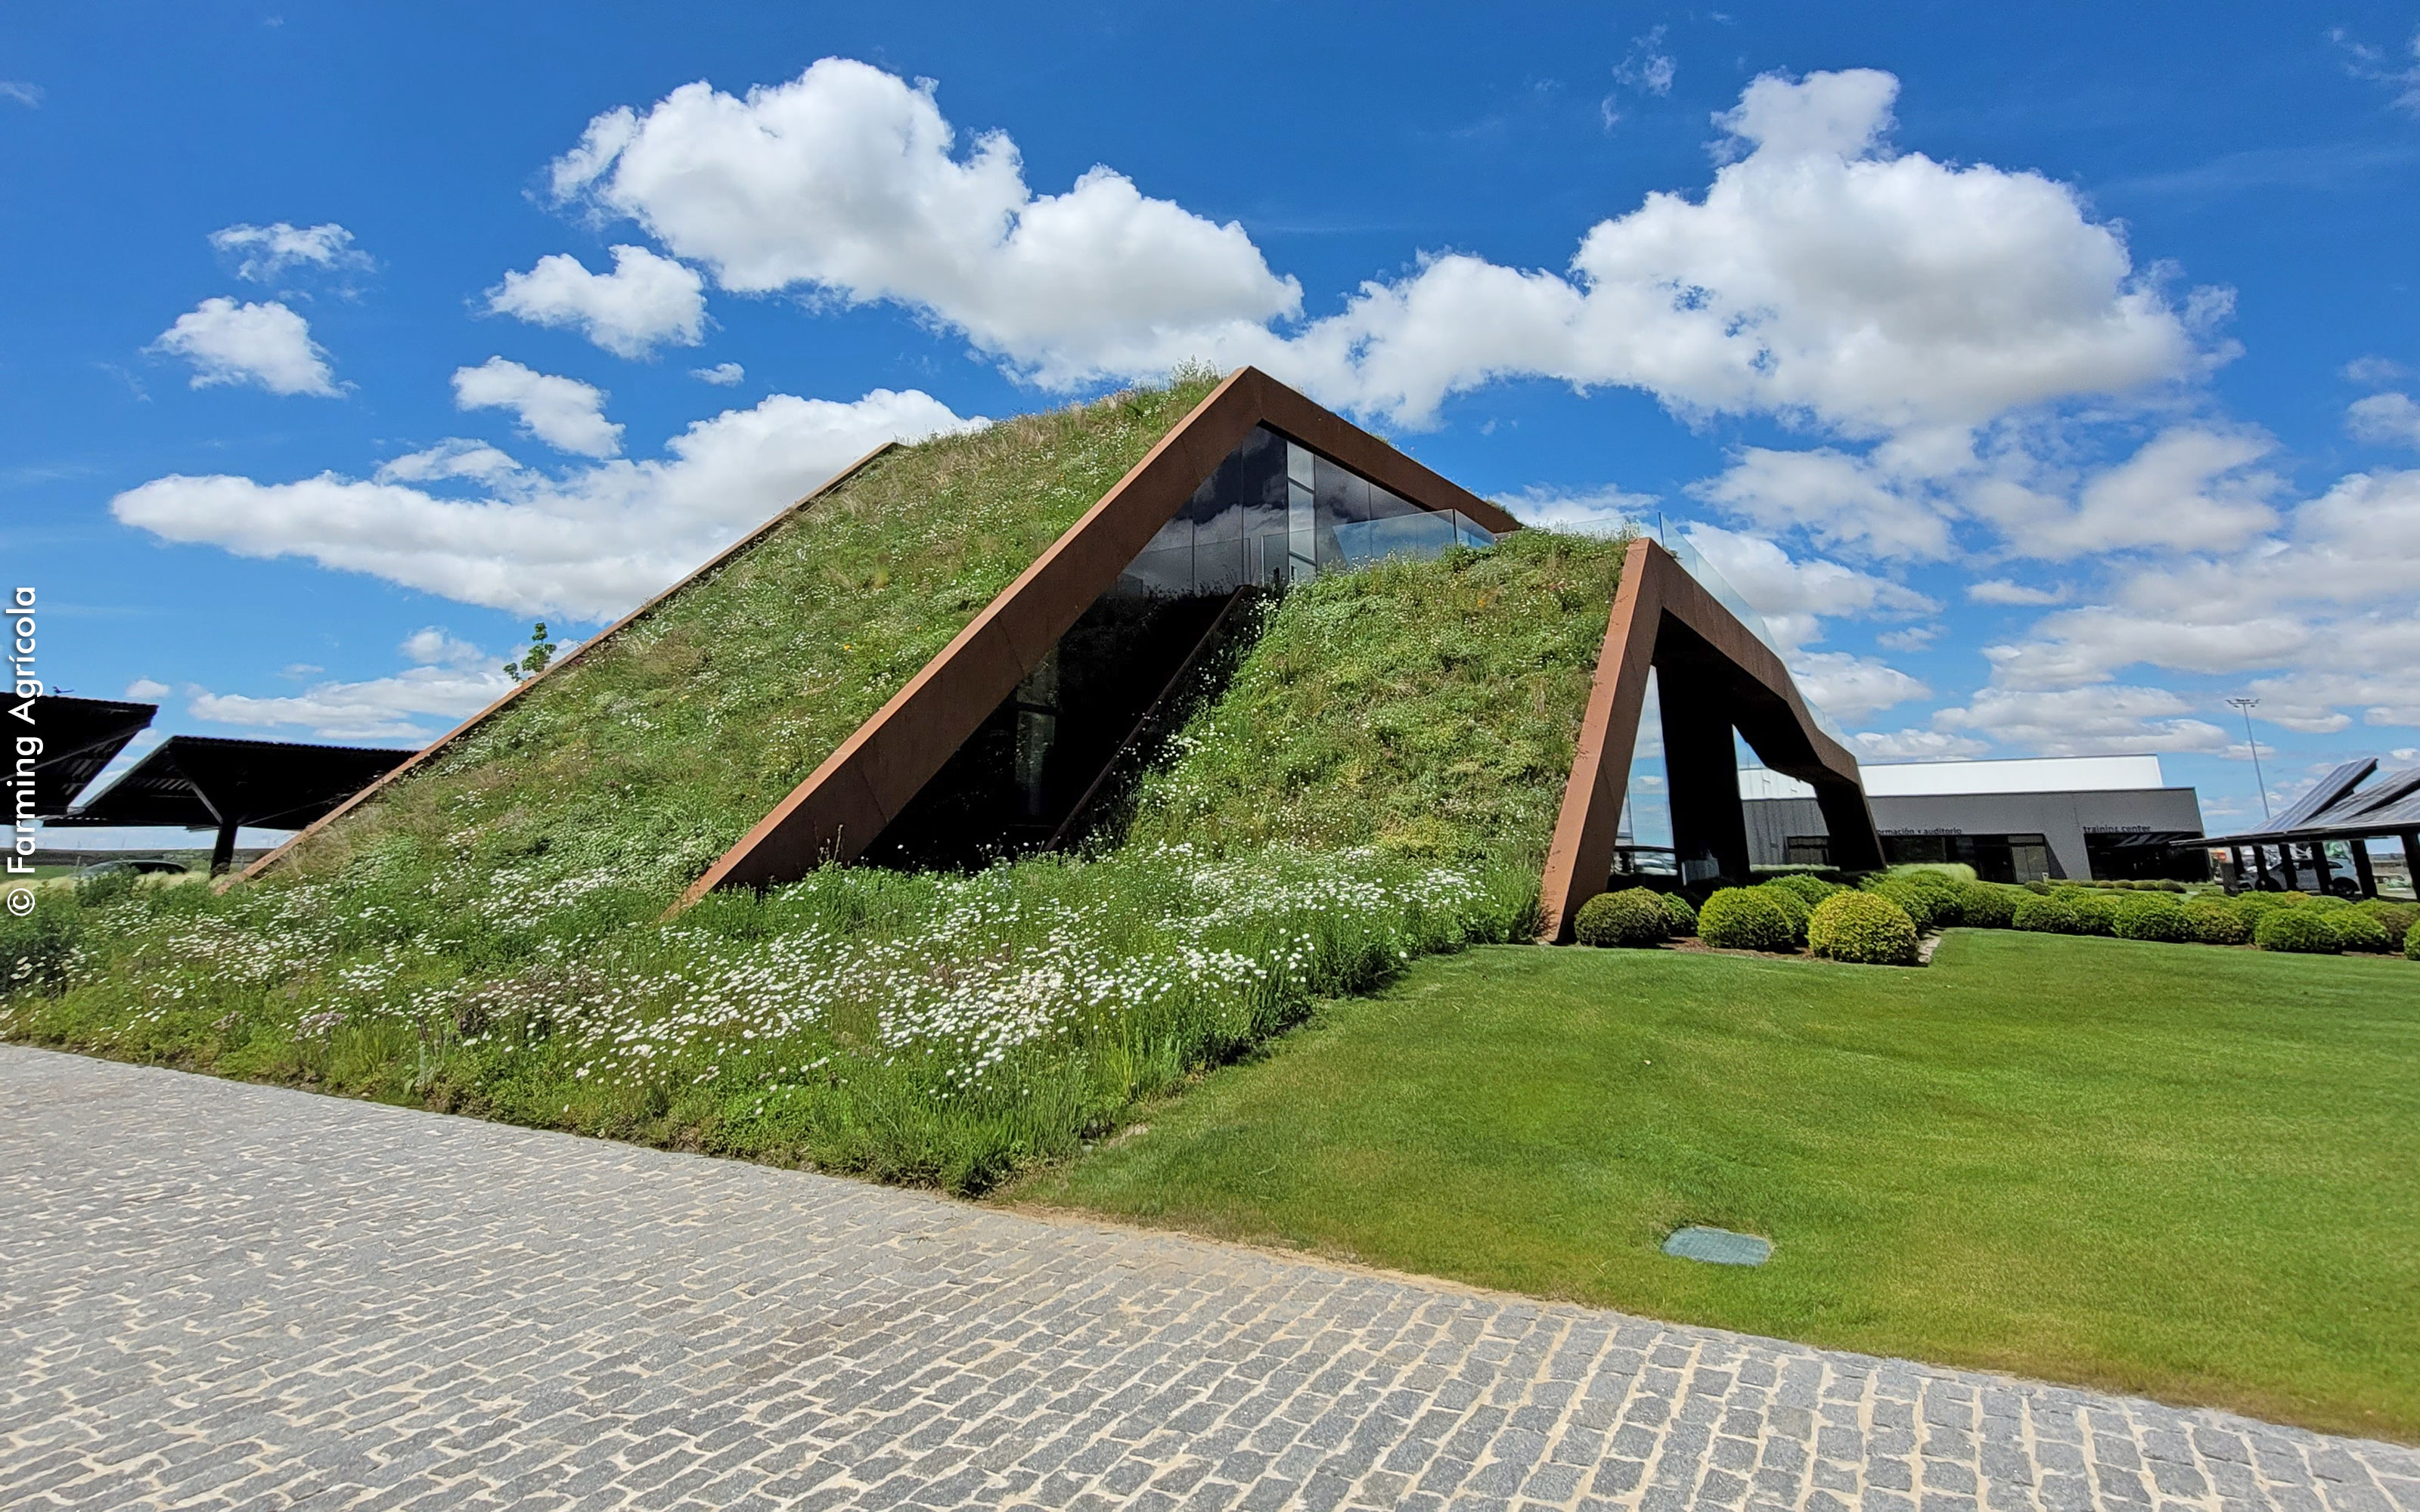 Pitched green roof with a meadow